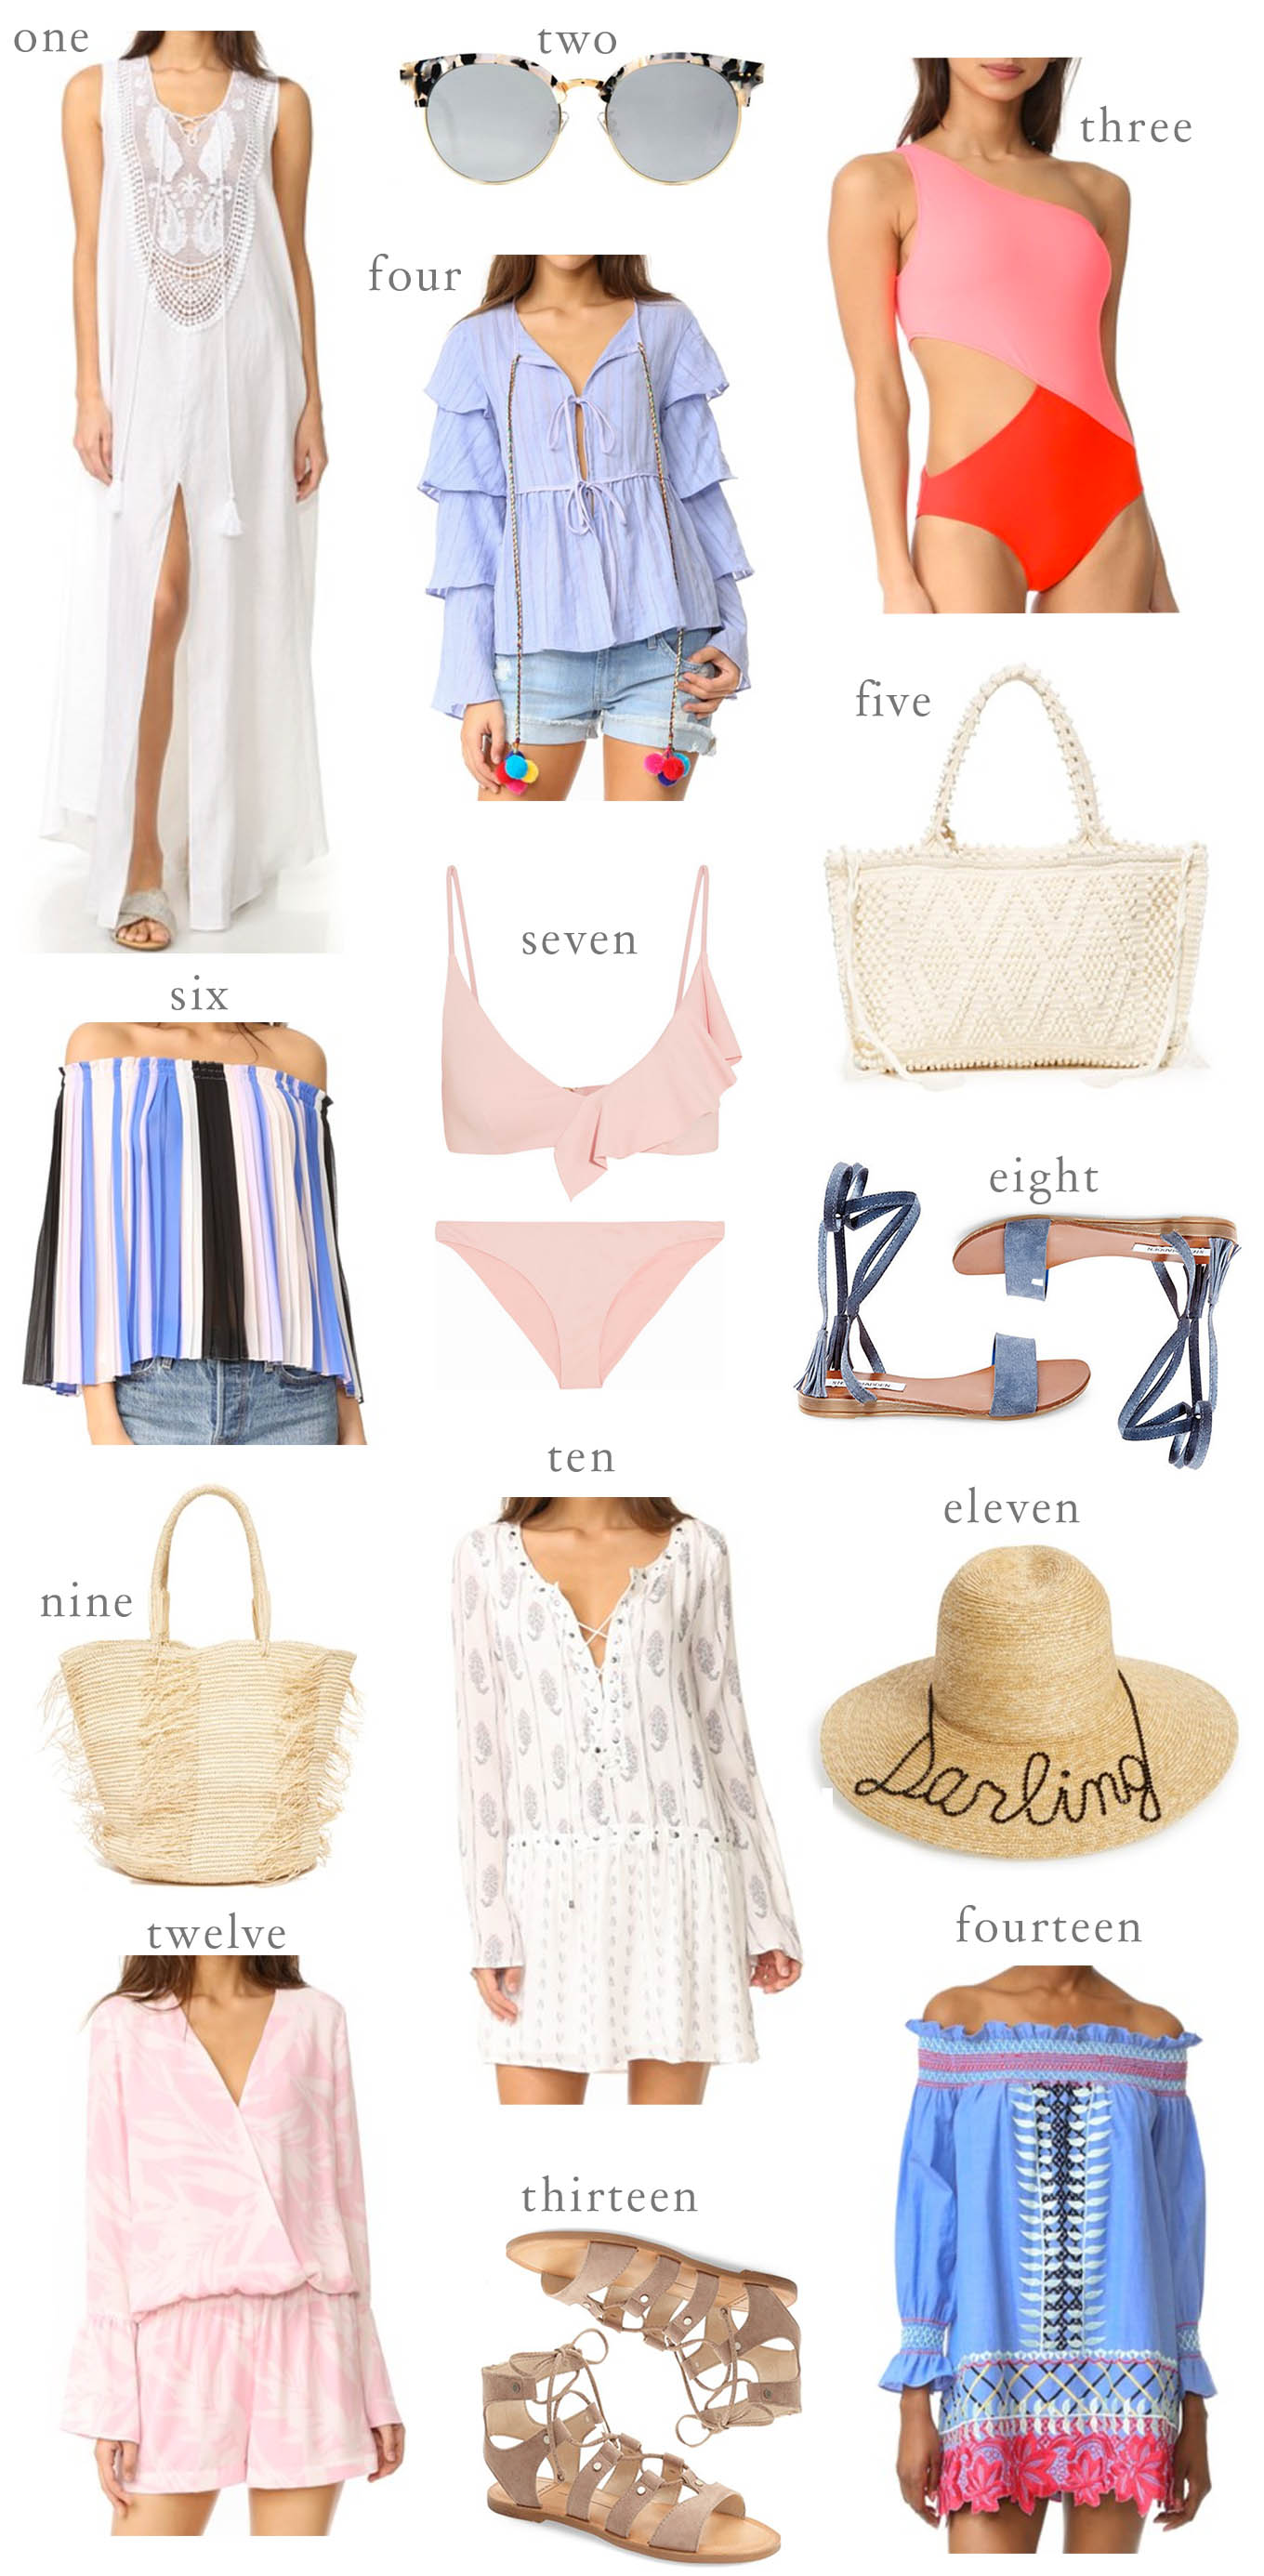 5 things to pack for every beach vacation